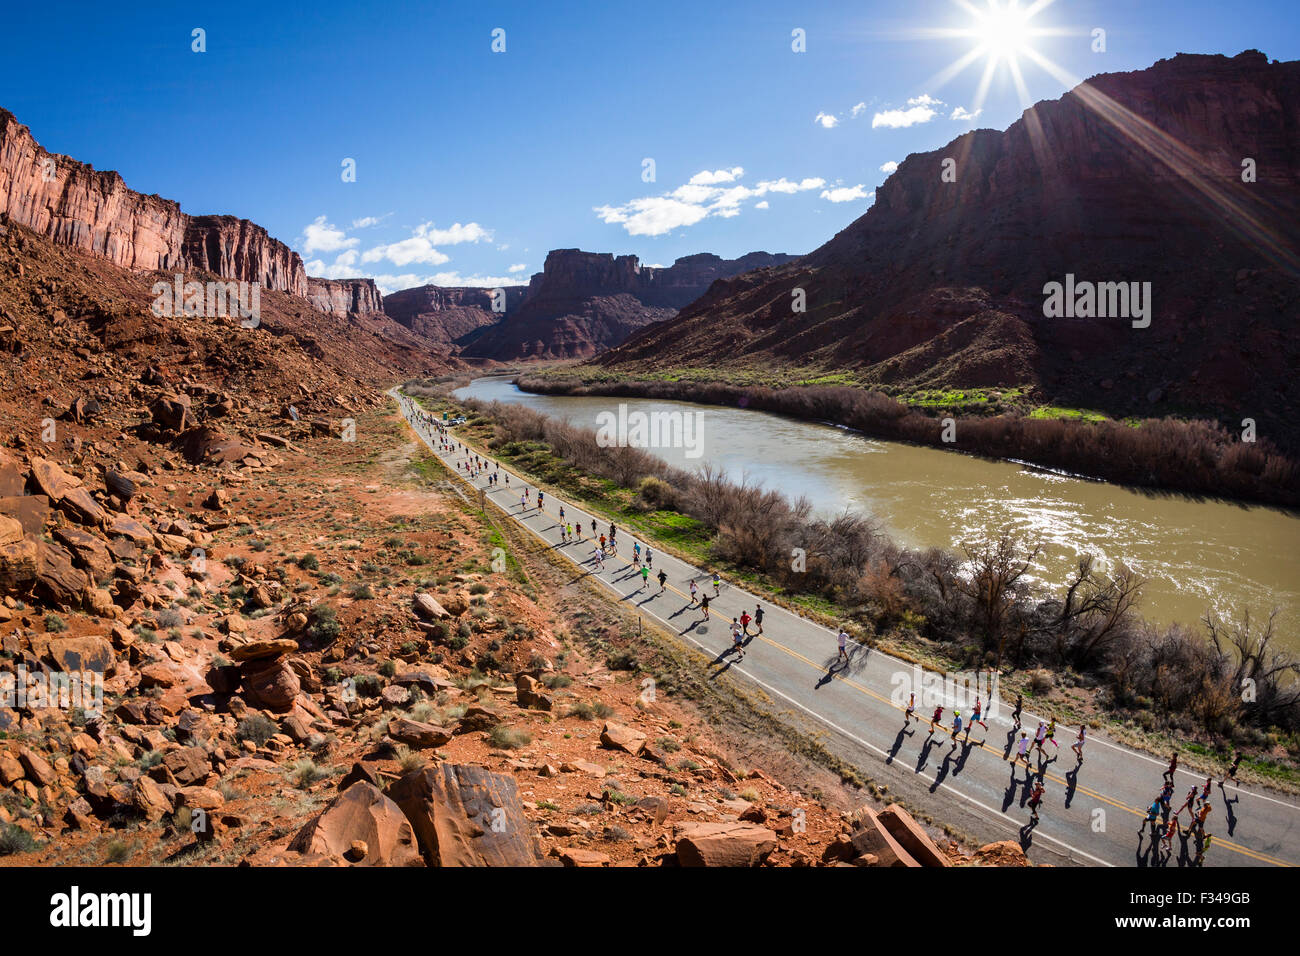 Large group of people running on a road next to a river during a running race. Stock Photo